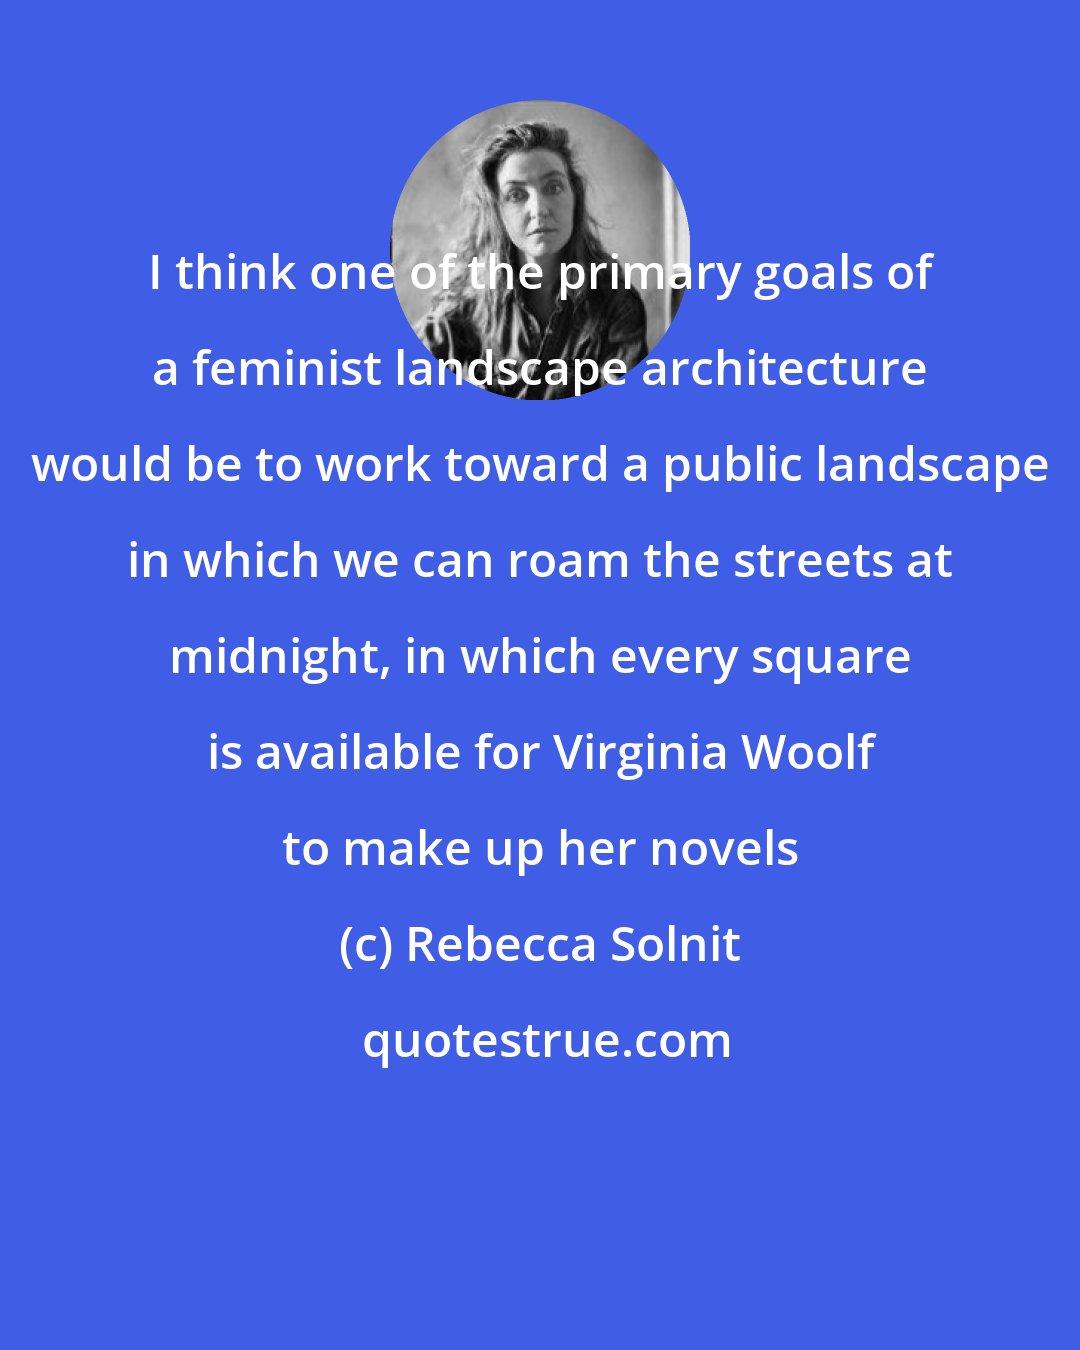 Rebecca Solnit: I think one of the primary goals of a feminist landscape architecture would be to work toward a public landscape in which we can roam the streets at midnight, in which every square is available for Virginia Woolf to make up her novels